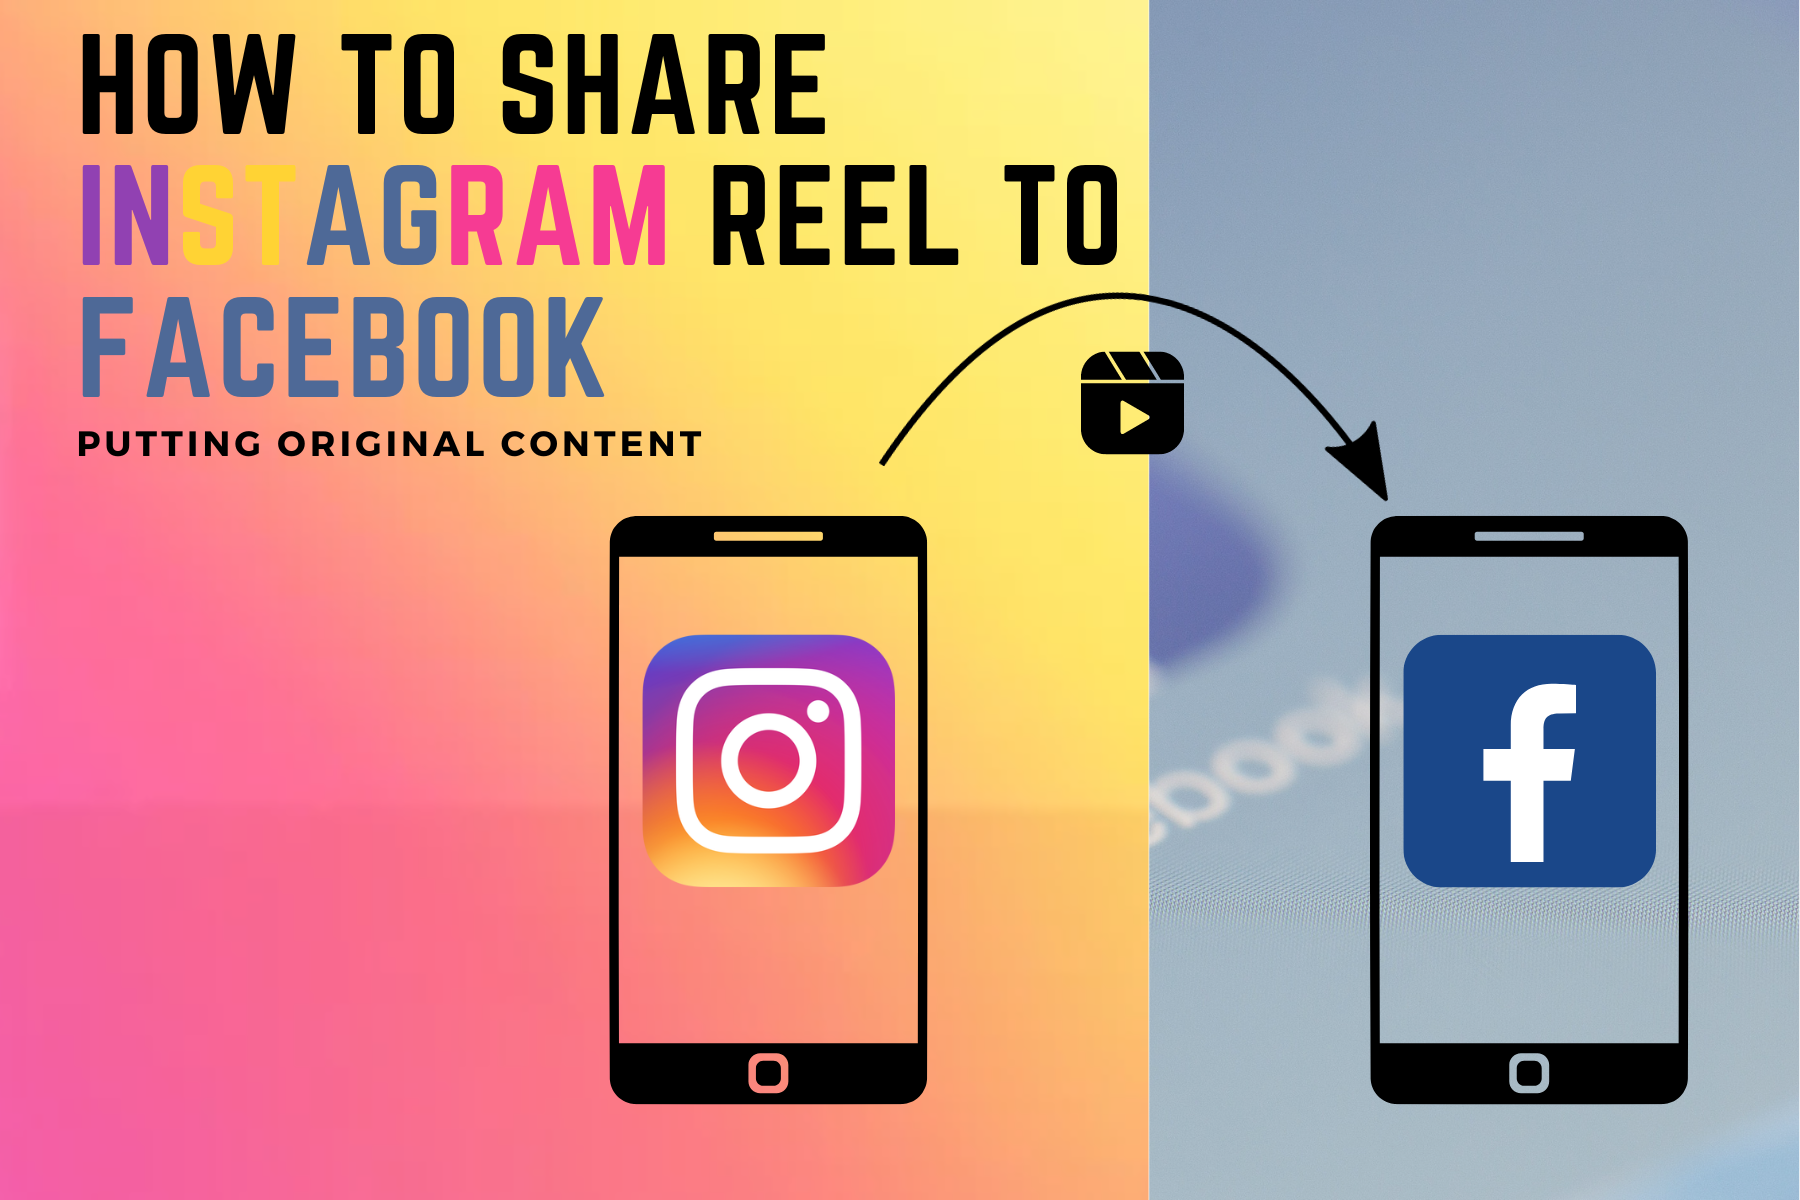 How To Share Instagram Reel To Facebook - Putting Original Content